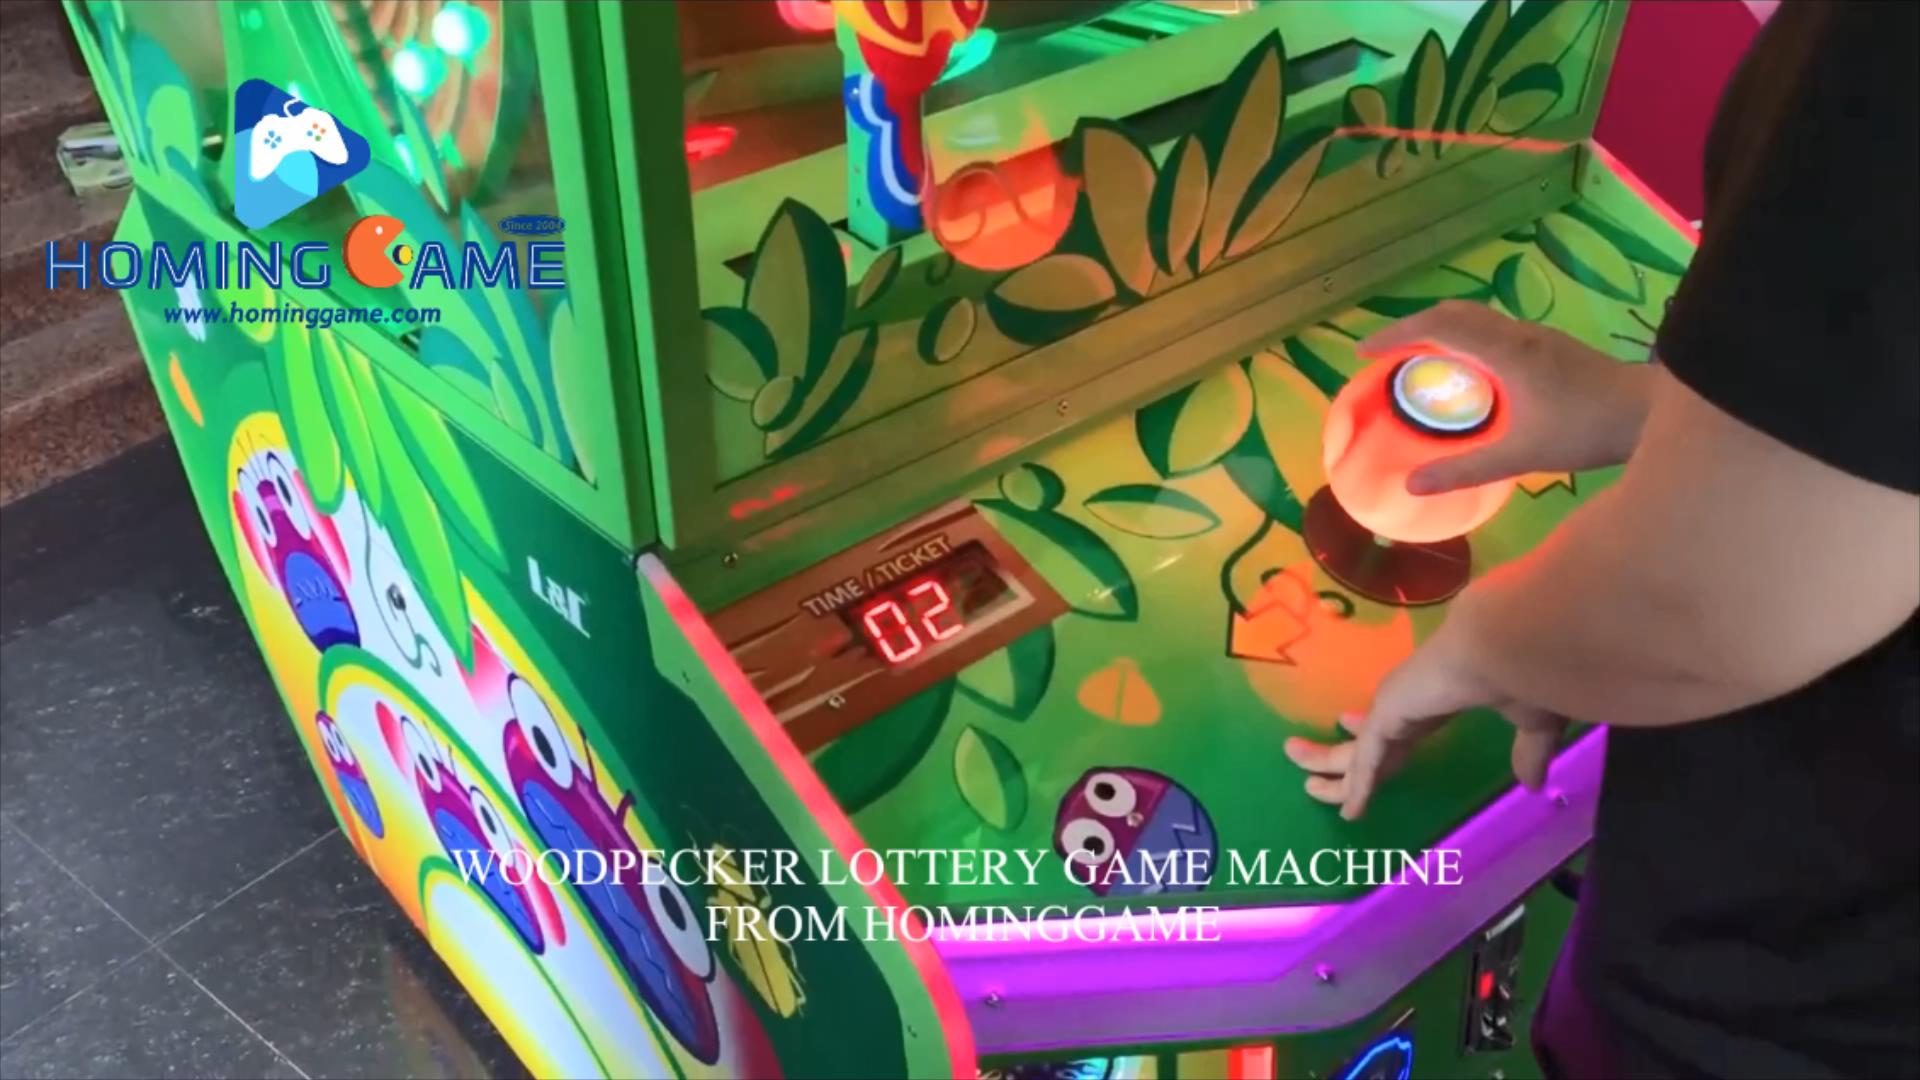 2020 December HomingGame New Released Coin Operated Lottery Game WoodPecker Redemption Game Machine(Order Call Whatsapp:+8618688409495),woodpecker lottery game machine,woodpecker redemption game machine,redemption game machine,lottery game machine,kids game machine,lottery redemption game machine,kids lottery game machine,game machine,arcade game machine,coin operated game machine,indoor game machine,electrical game machine,amsuement park game equipment,game equipment,amusement machine,hominggame,www.gametube.hk